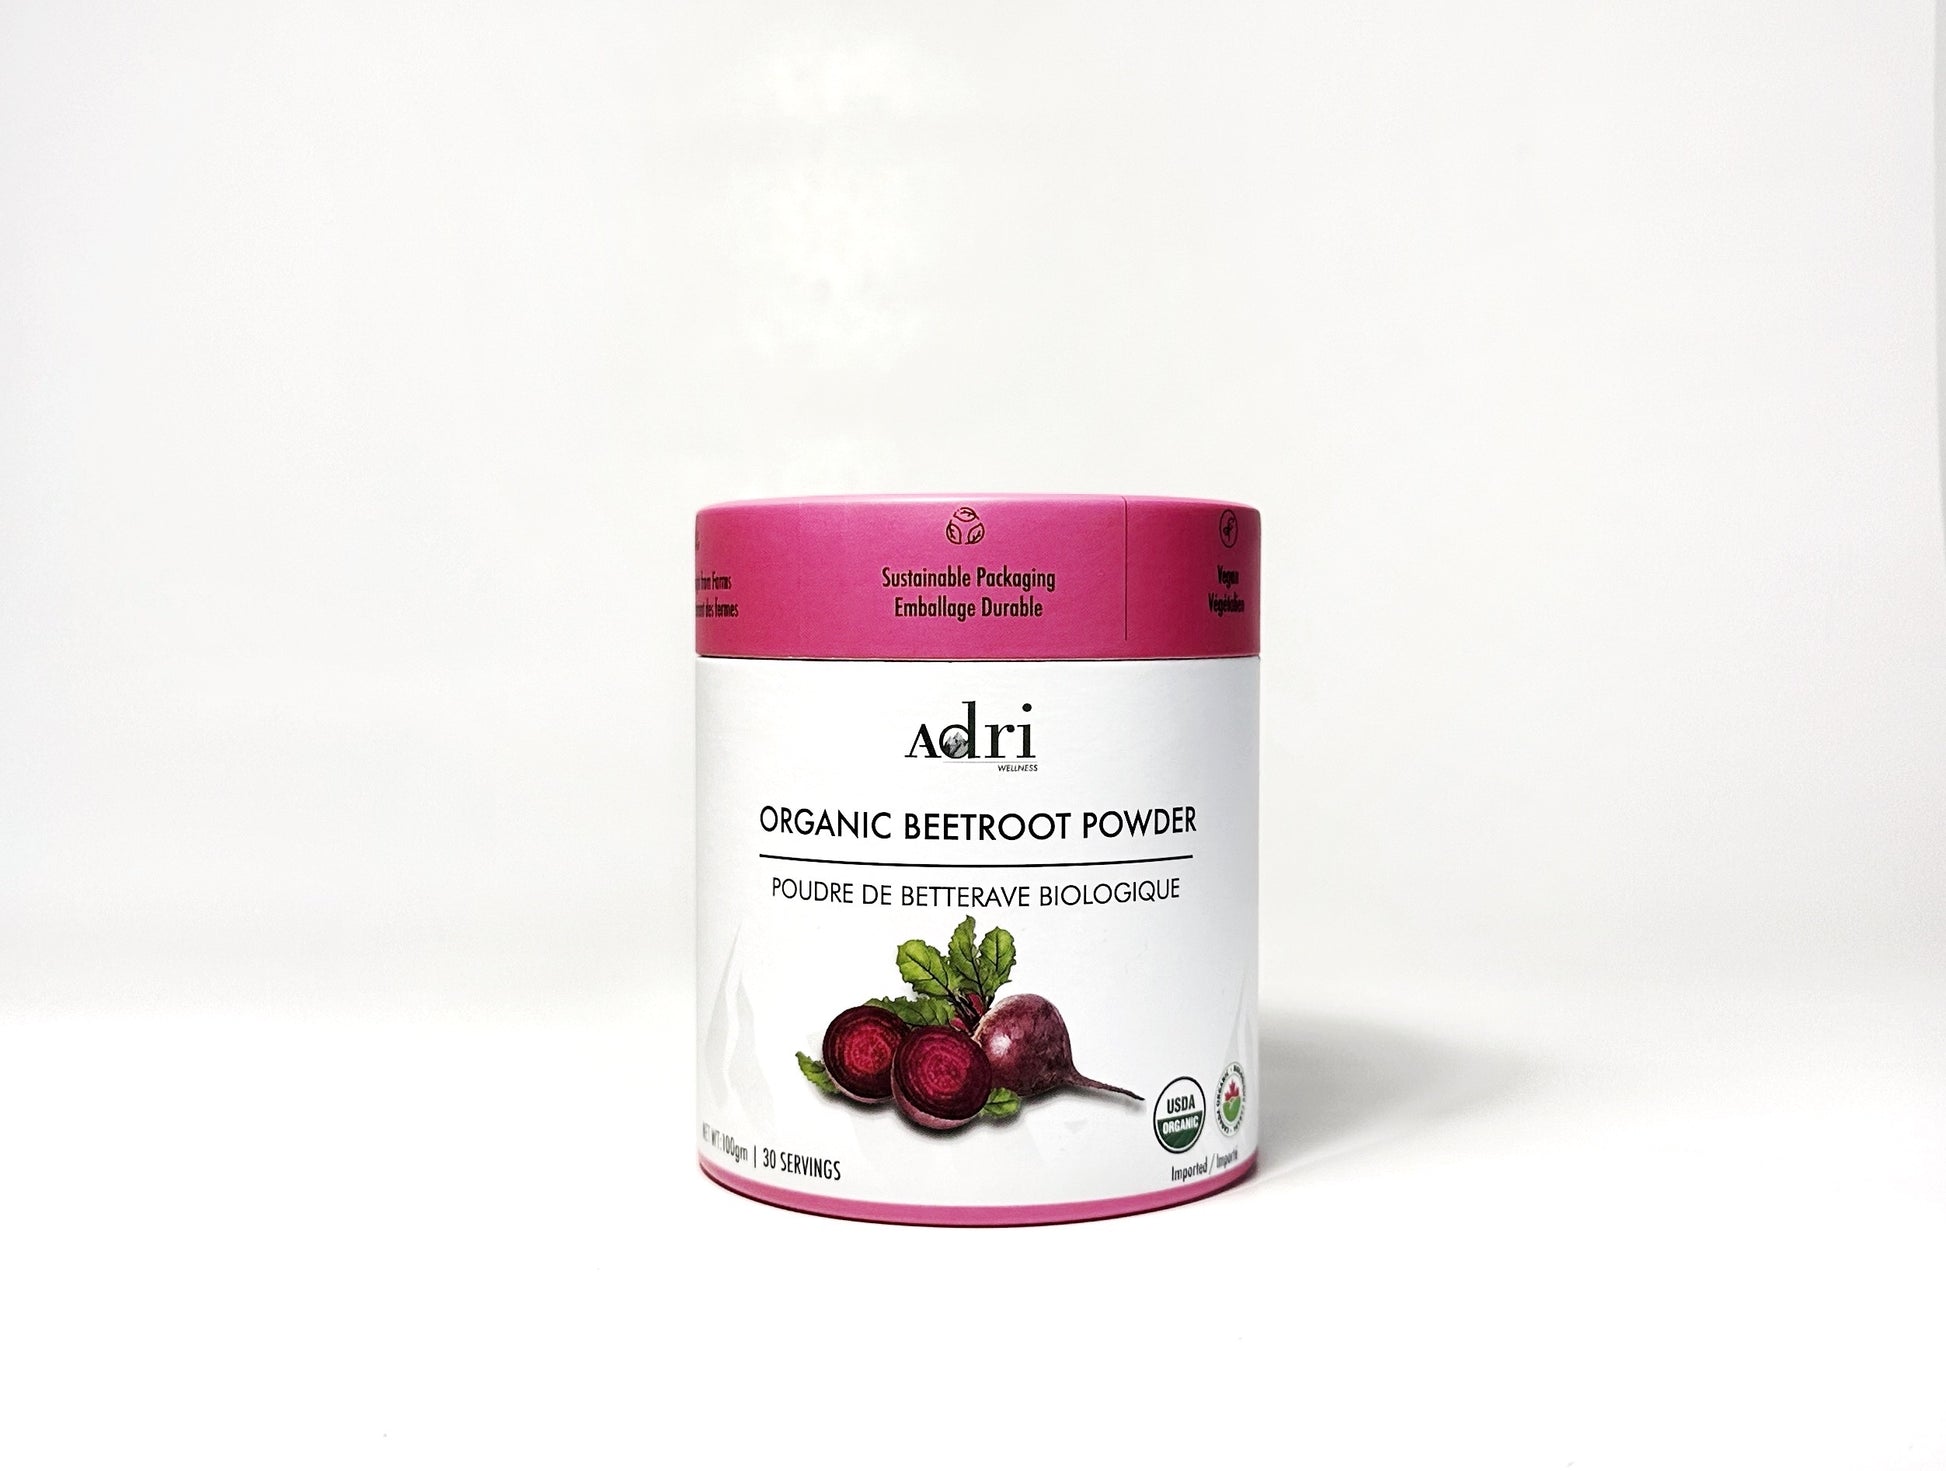 a 100gm sustainable printed paper tube packaging container of Adri Wellness organic Beetroot Powder